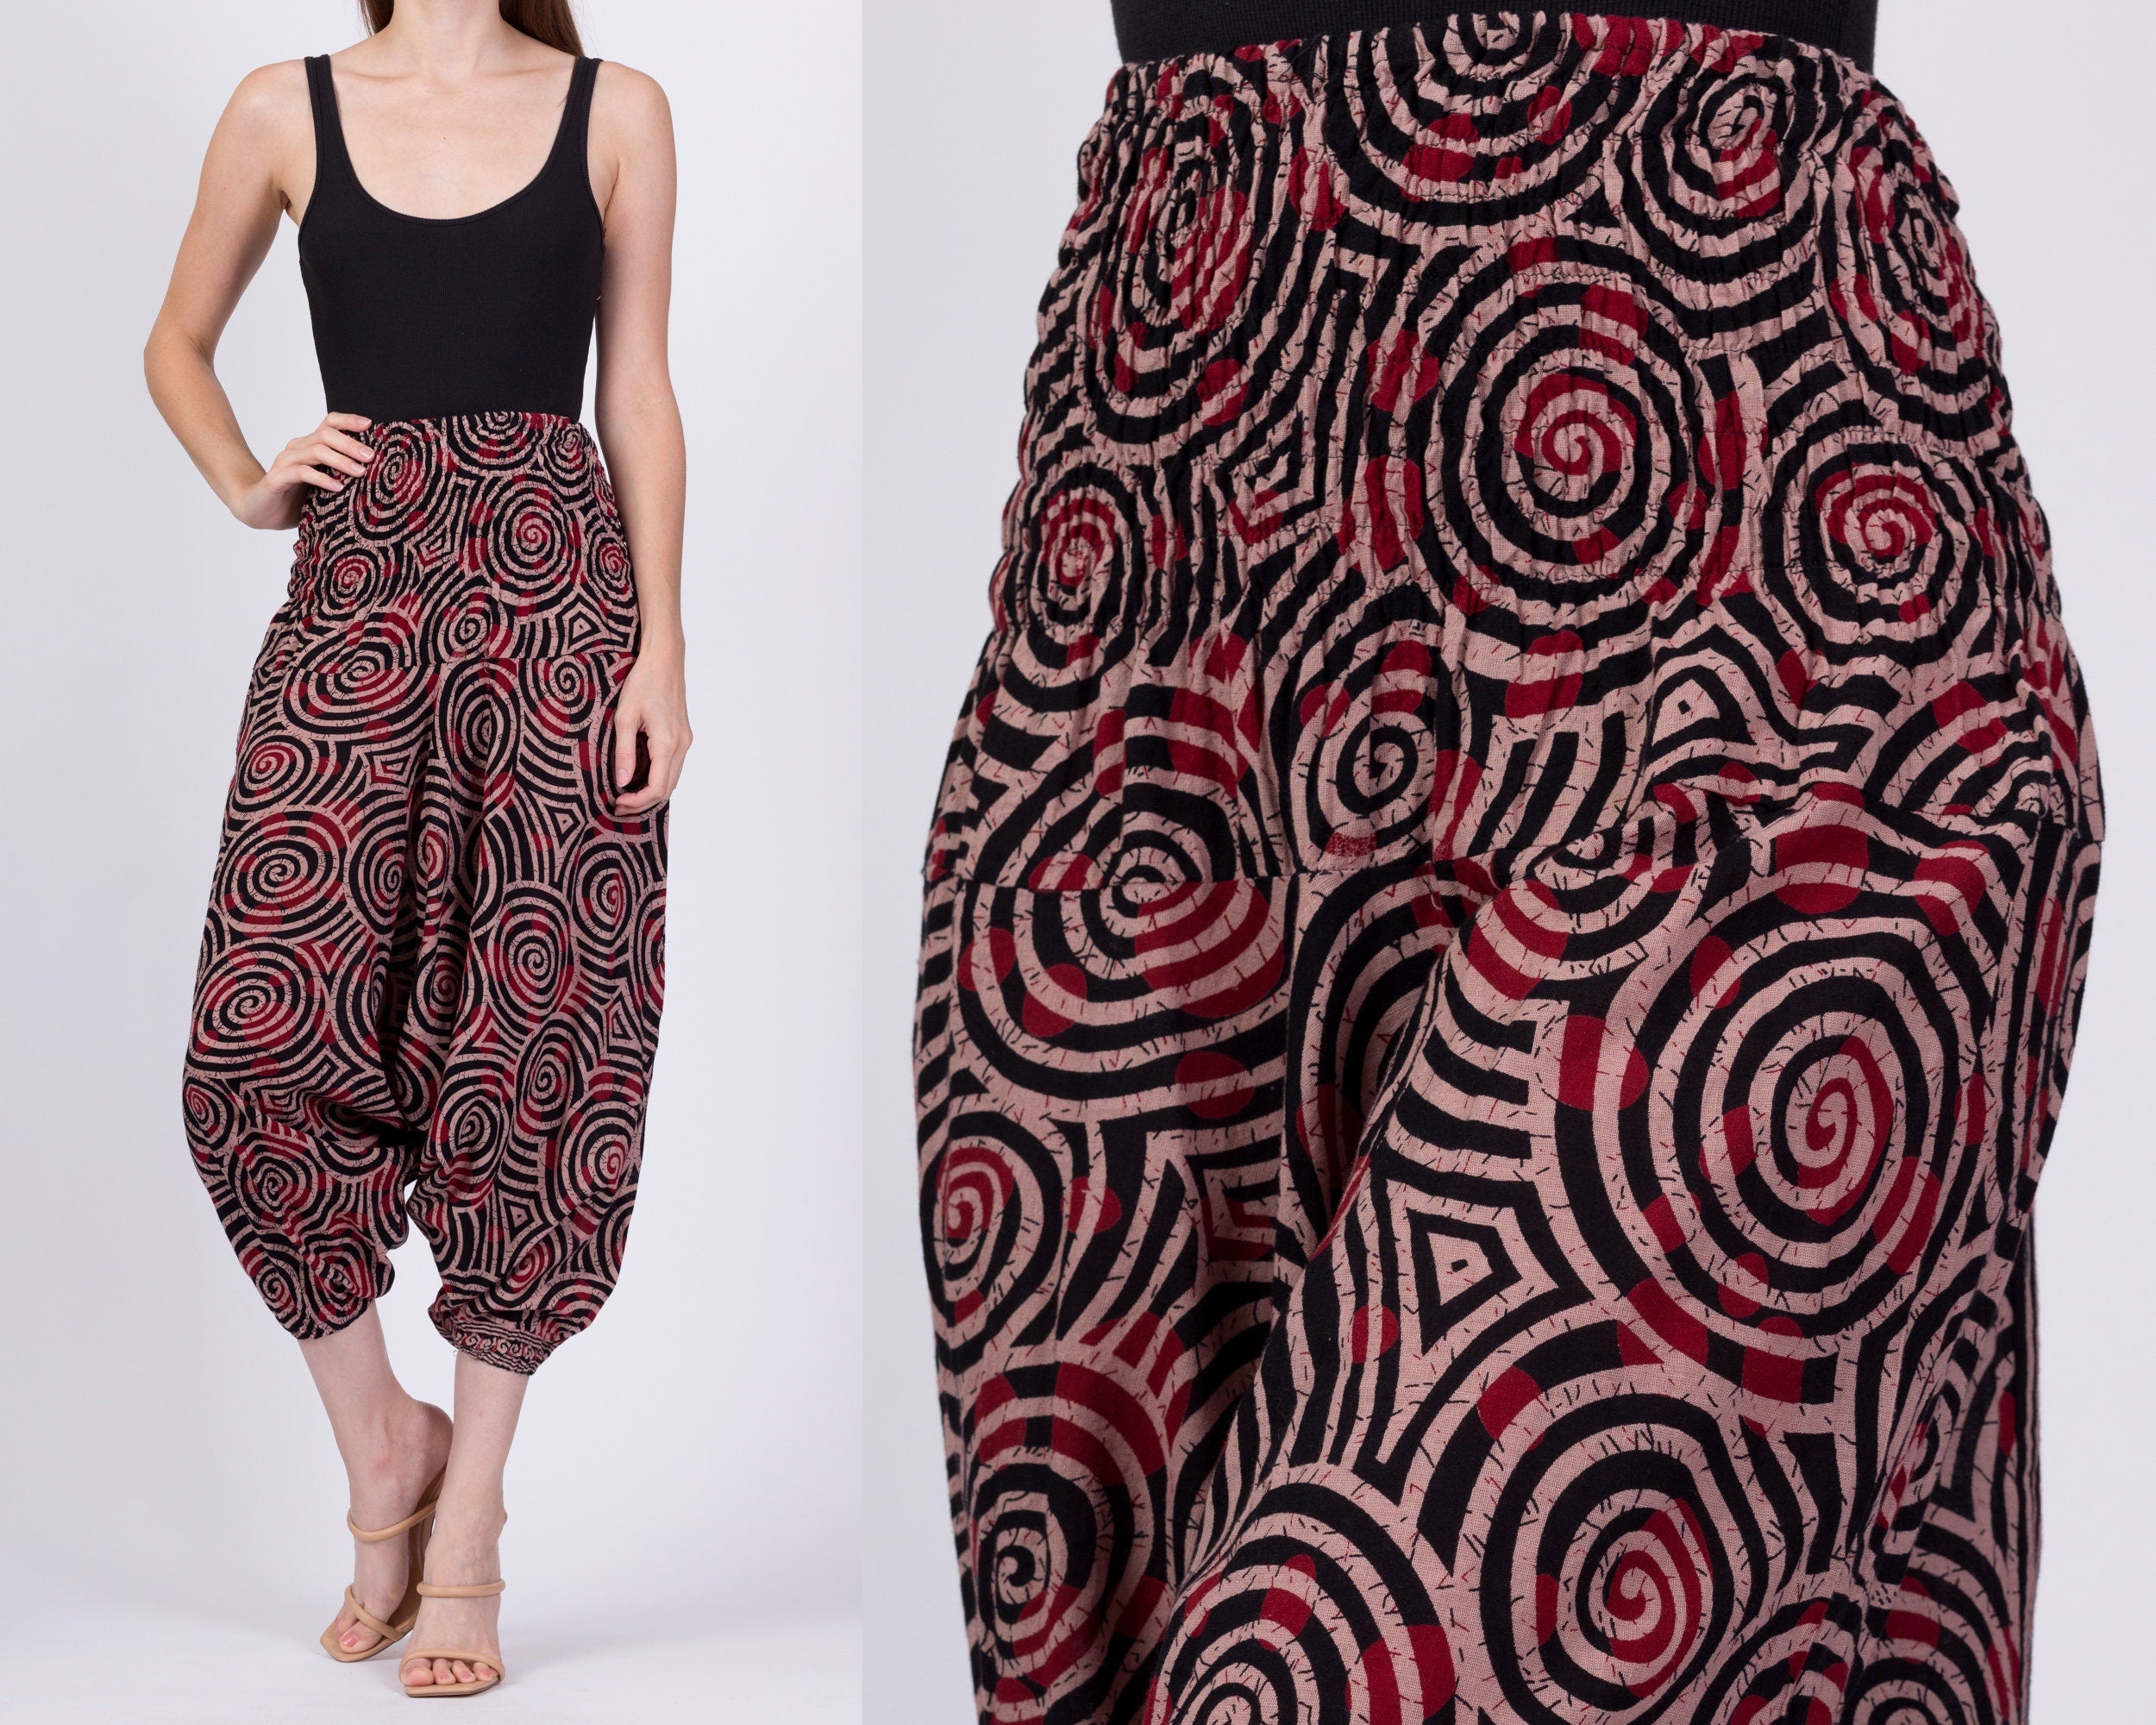 These $15 Harem Pants Have 800+ 5-Star Amazon Reviews